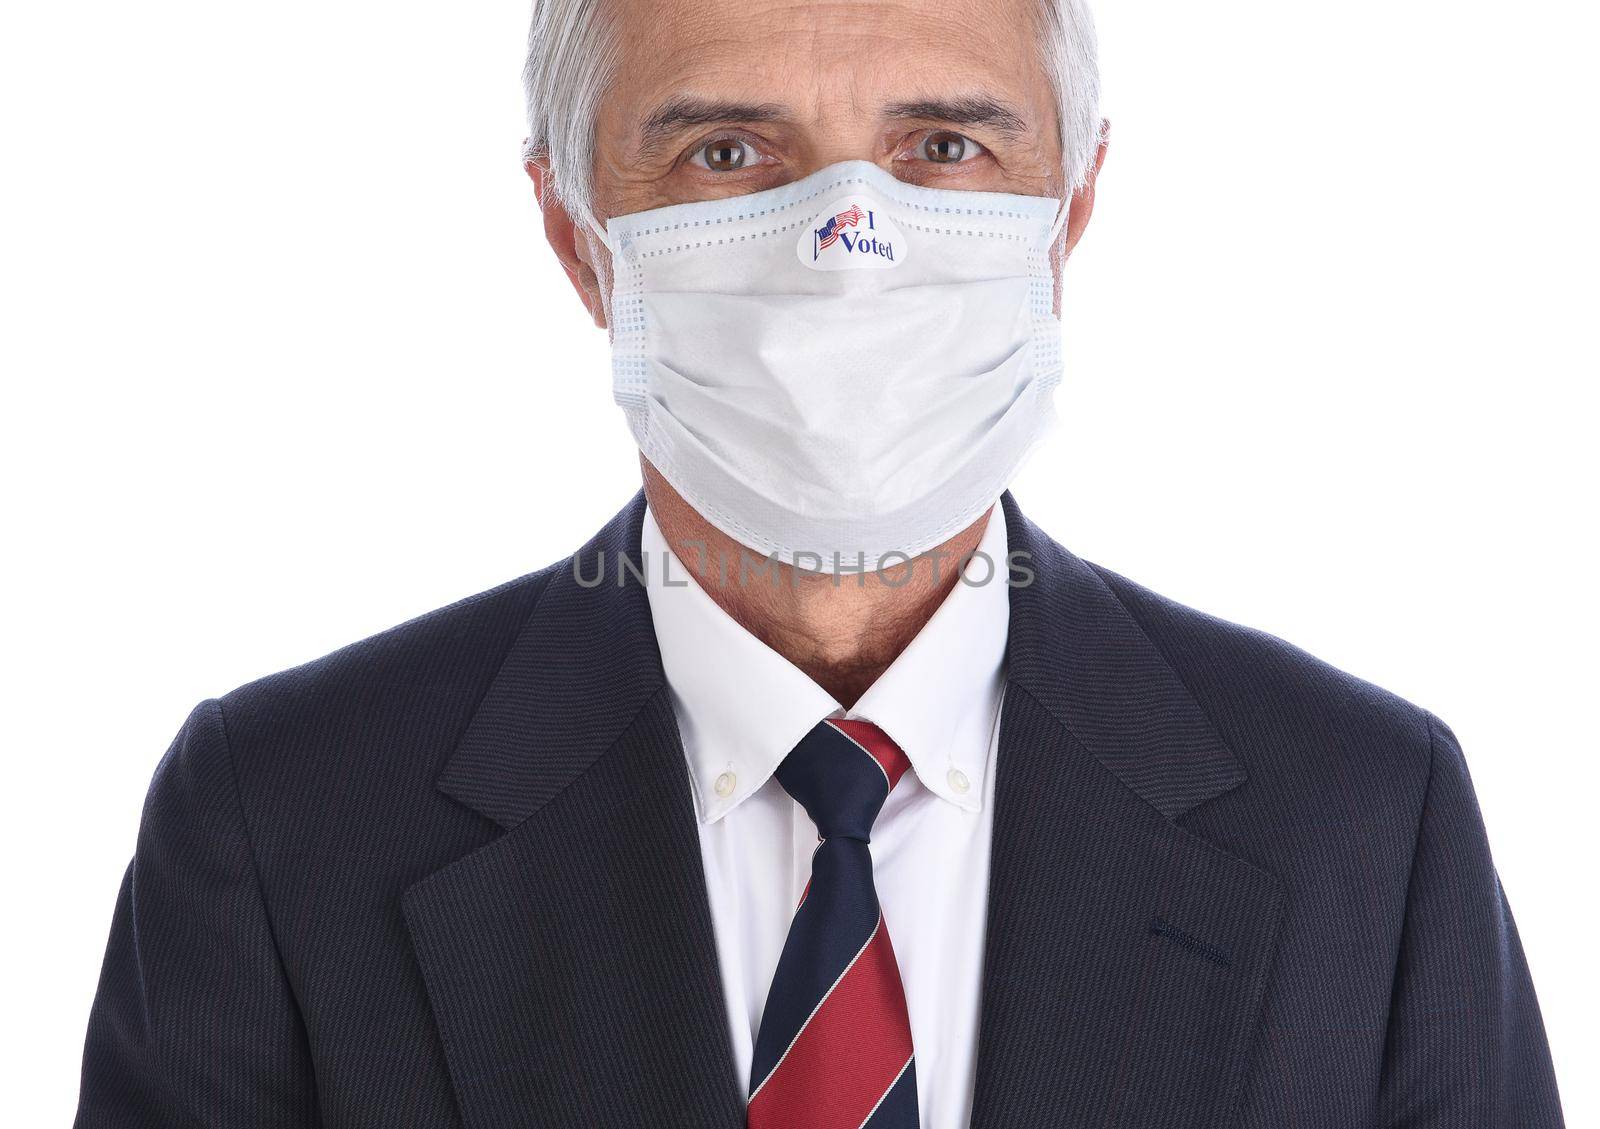 Closeup of a businessman with an I Voted sticker on the COVID-19 protective mask he wore to vote.